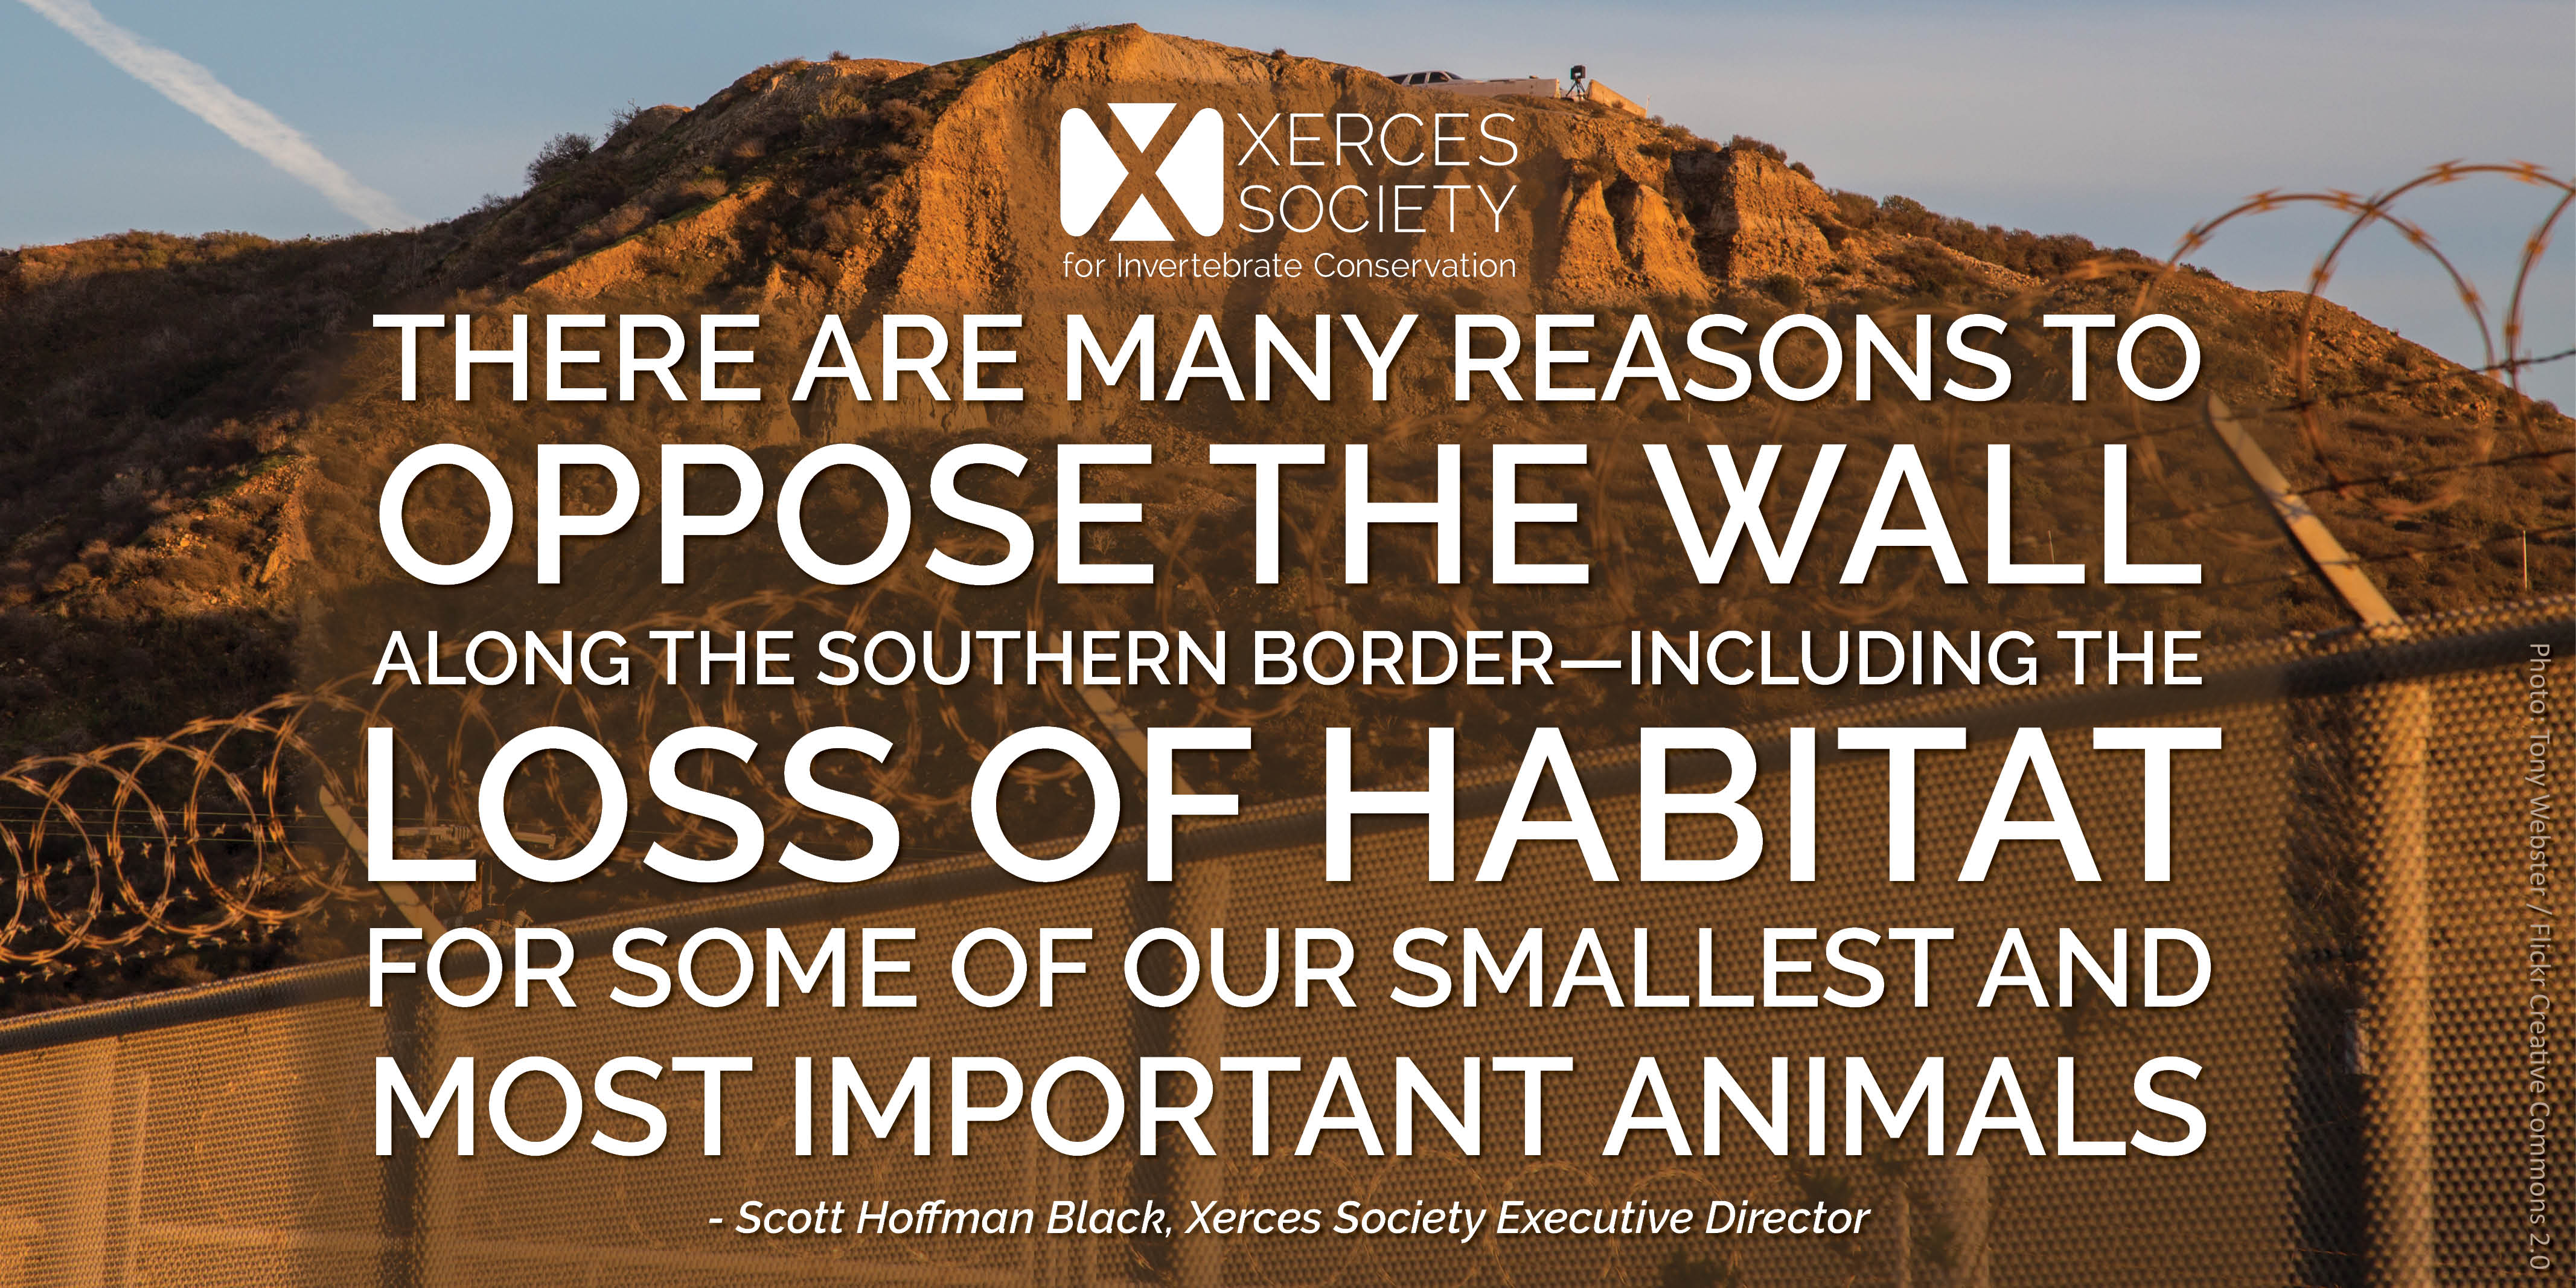 Superimposed on an image of border fencing, the Xerces logo sits above text that reads, "'There are many reasons to oppose the wall along the southern border—including the loss of habitat for some of our smallest and most important animals' – Scott Hoffman Black, Xerces Society Executive Director"